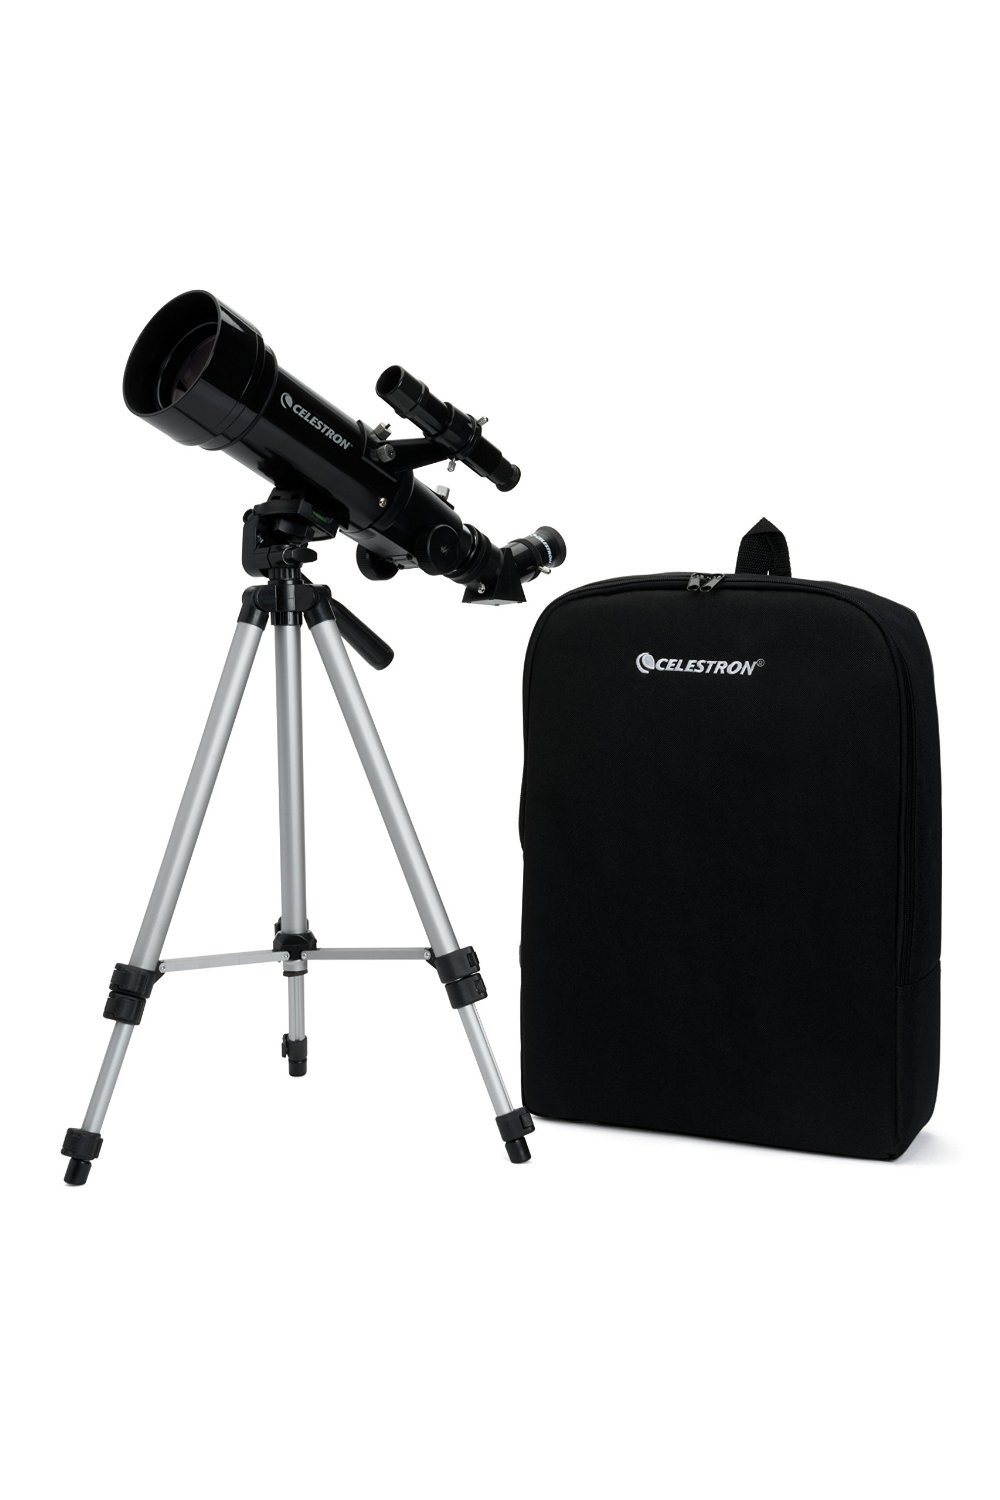 Travel Scope 70mm Celestron 21035 Astronomical Telescope with Backpack Black